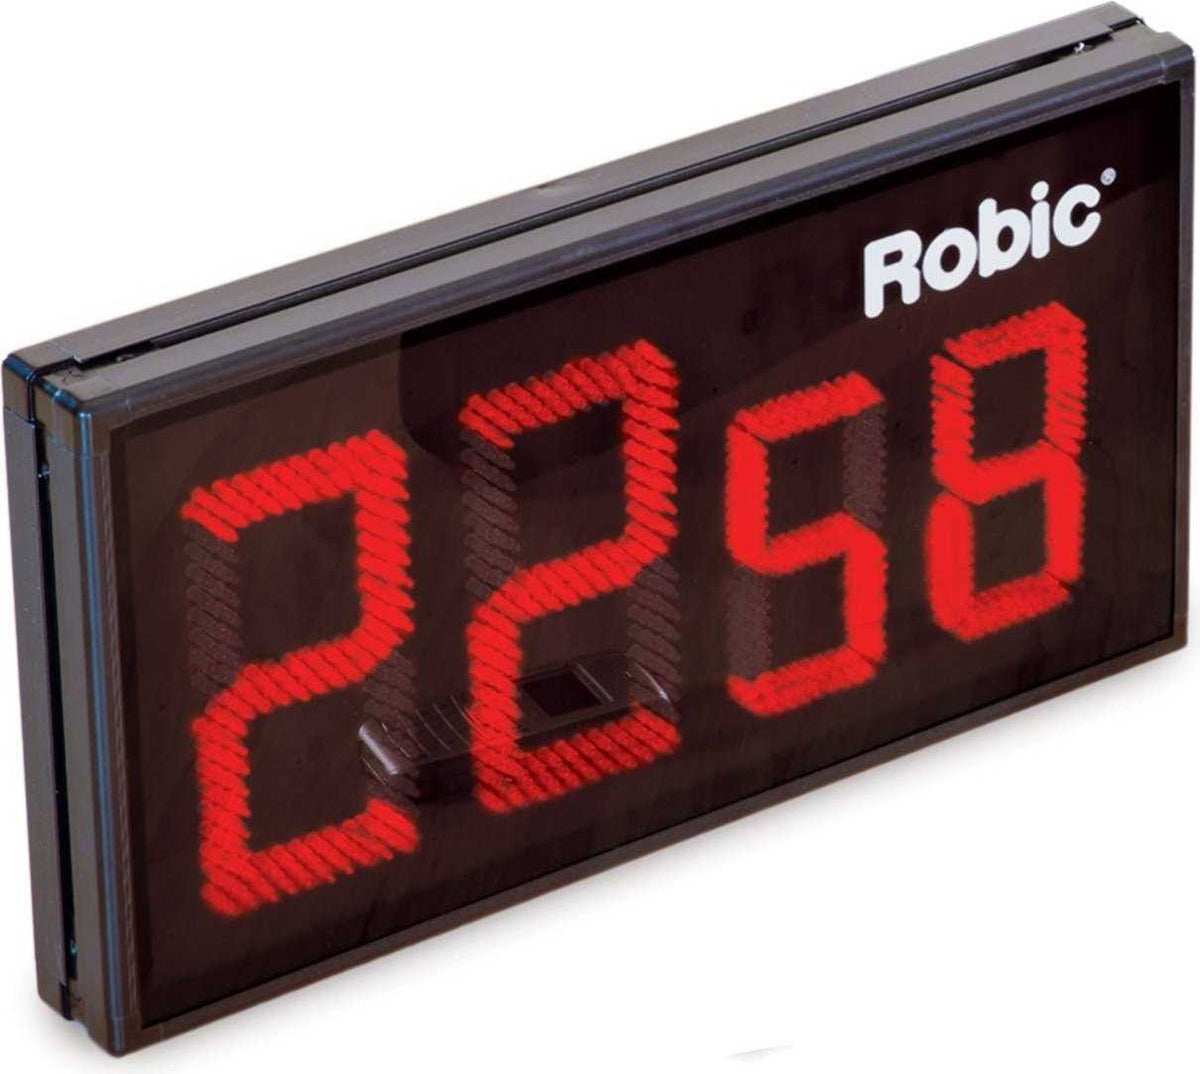 Robic M903 Bright View LED Display Timer - Black - HIT a Double